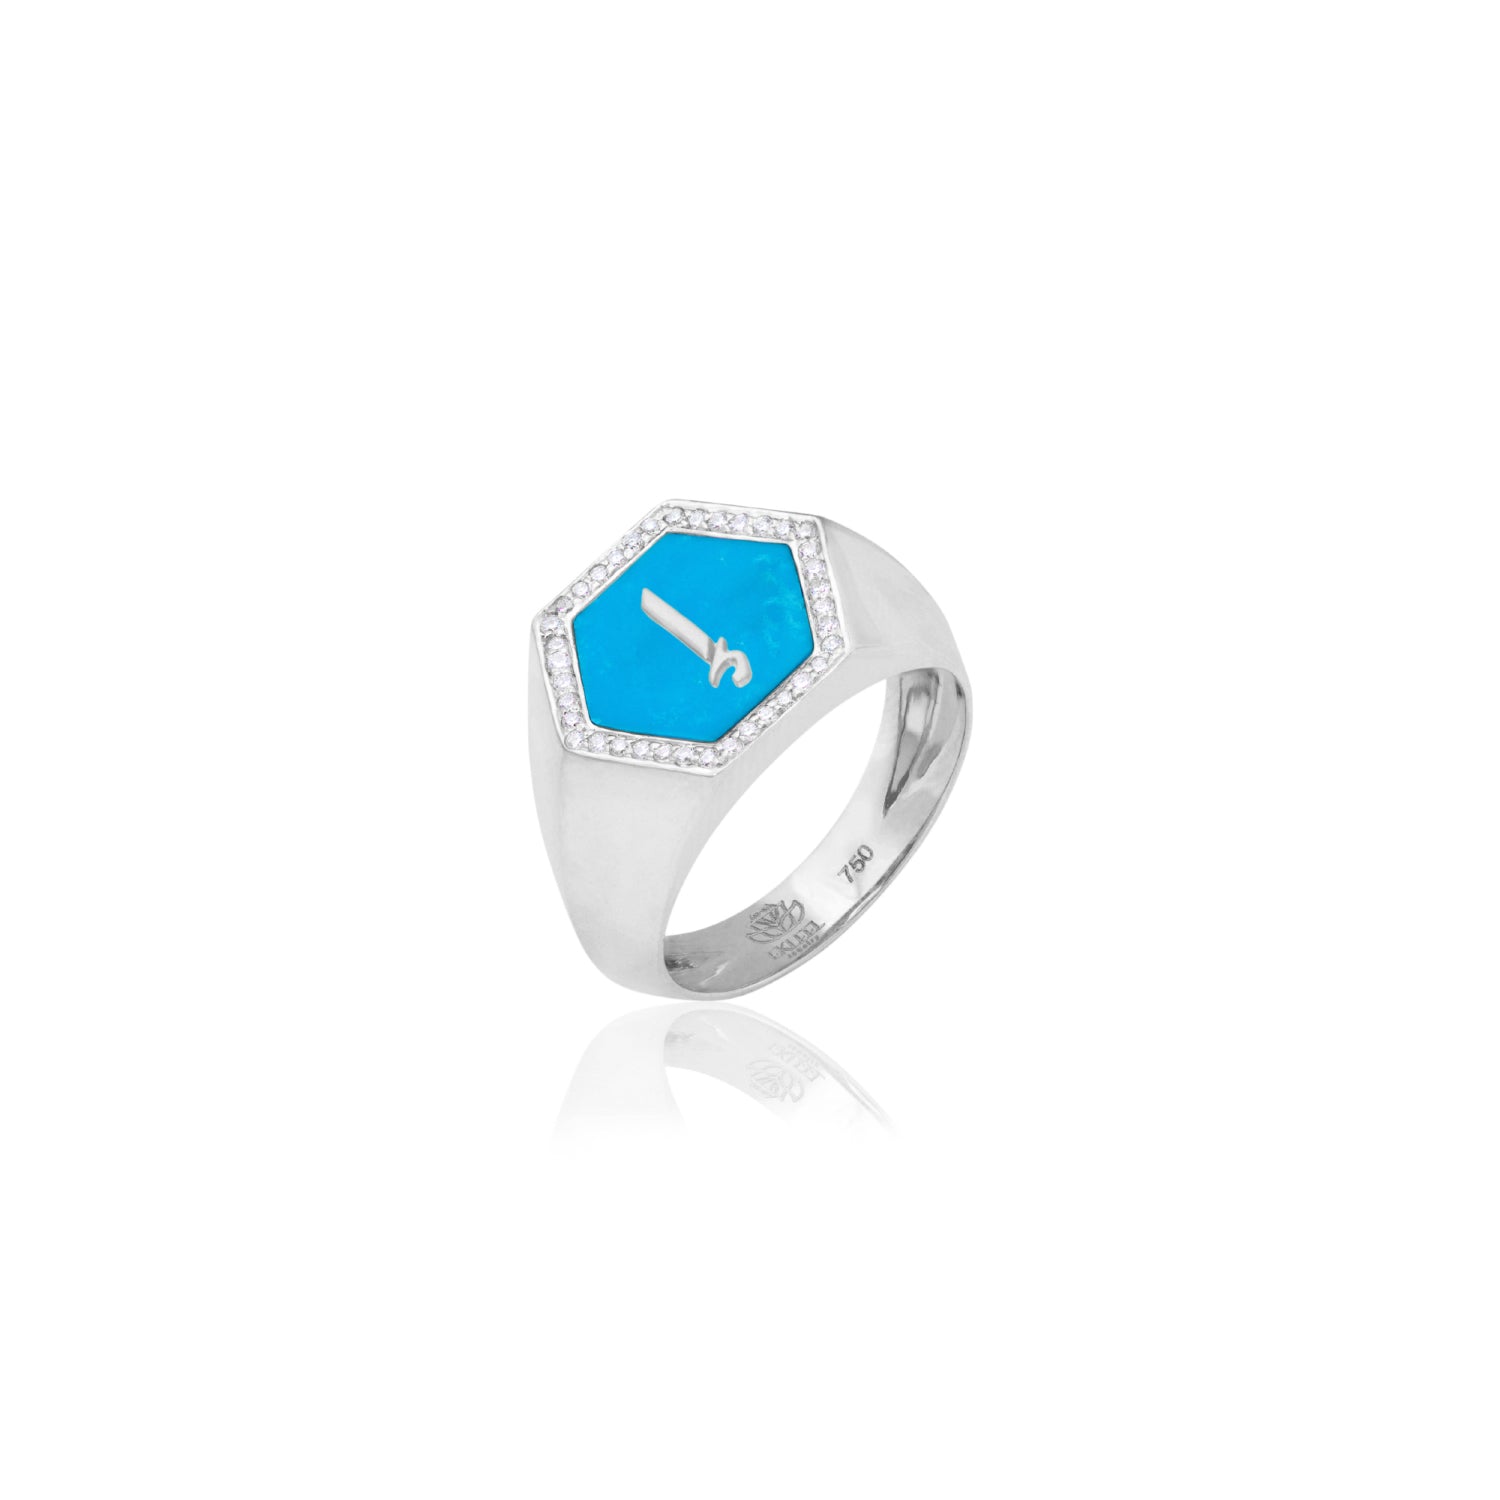 Qamoos 2.0 Letter إ Turquoise and Diamond Signet Ring in White Gold